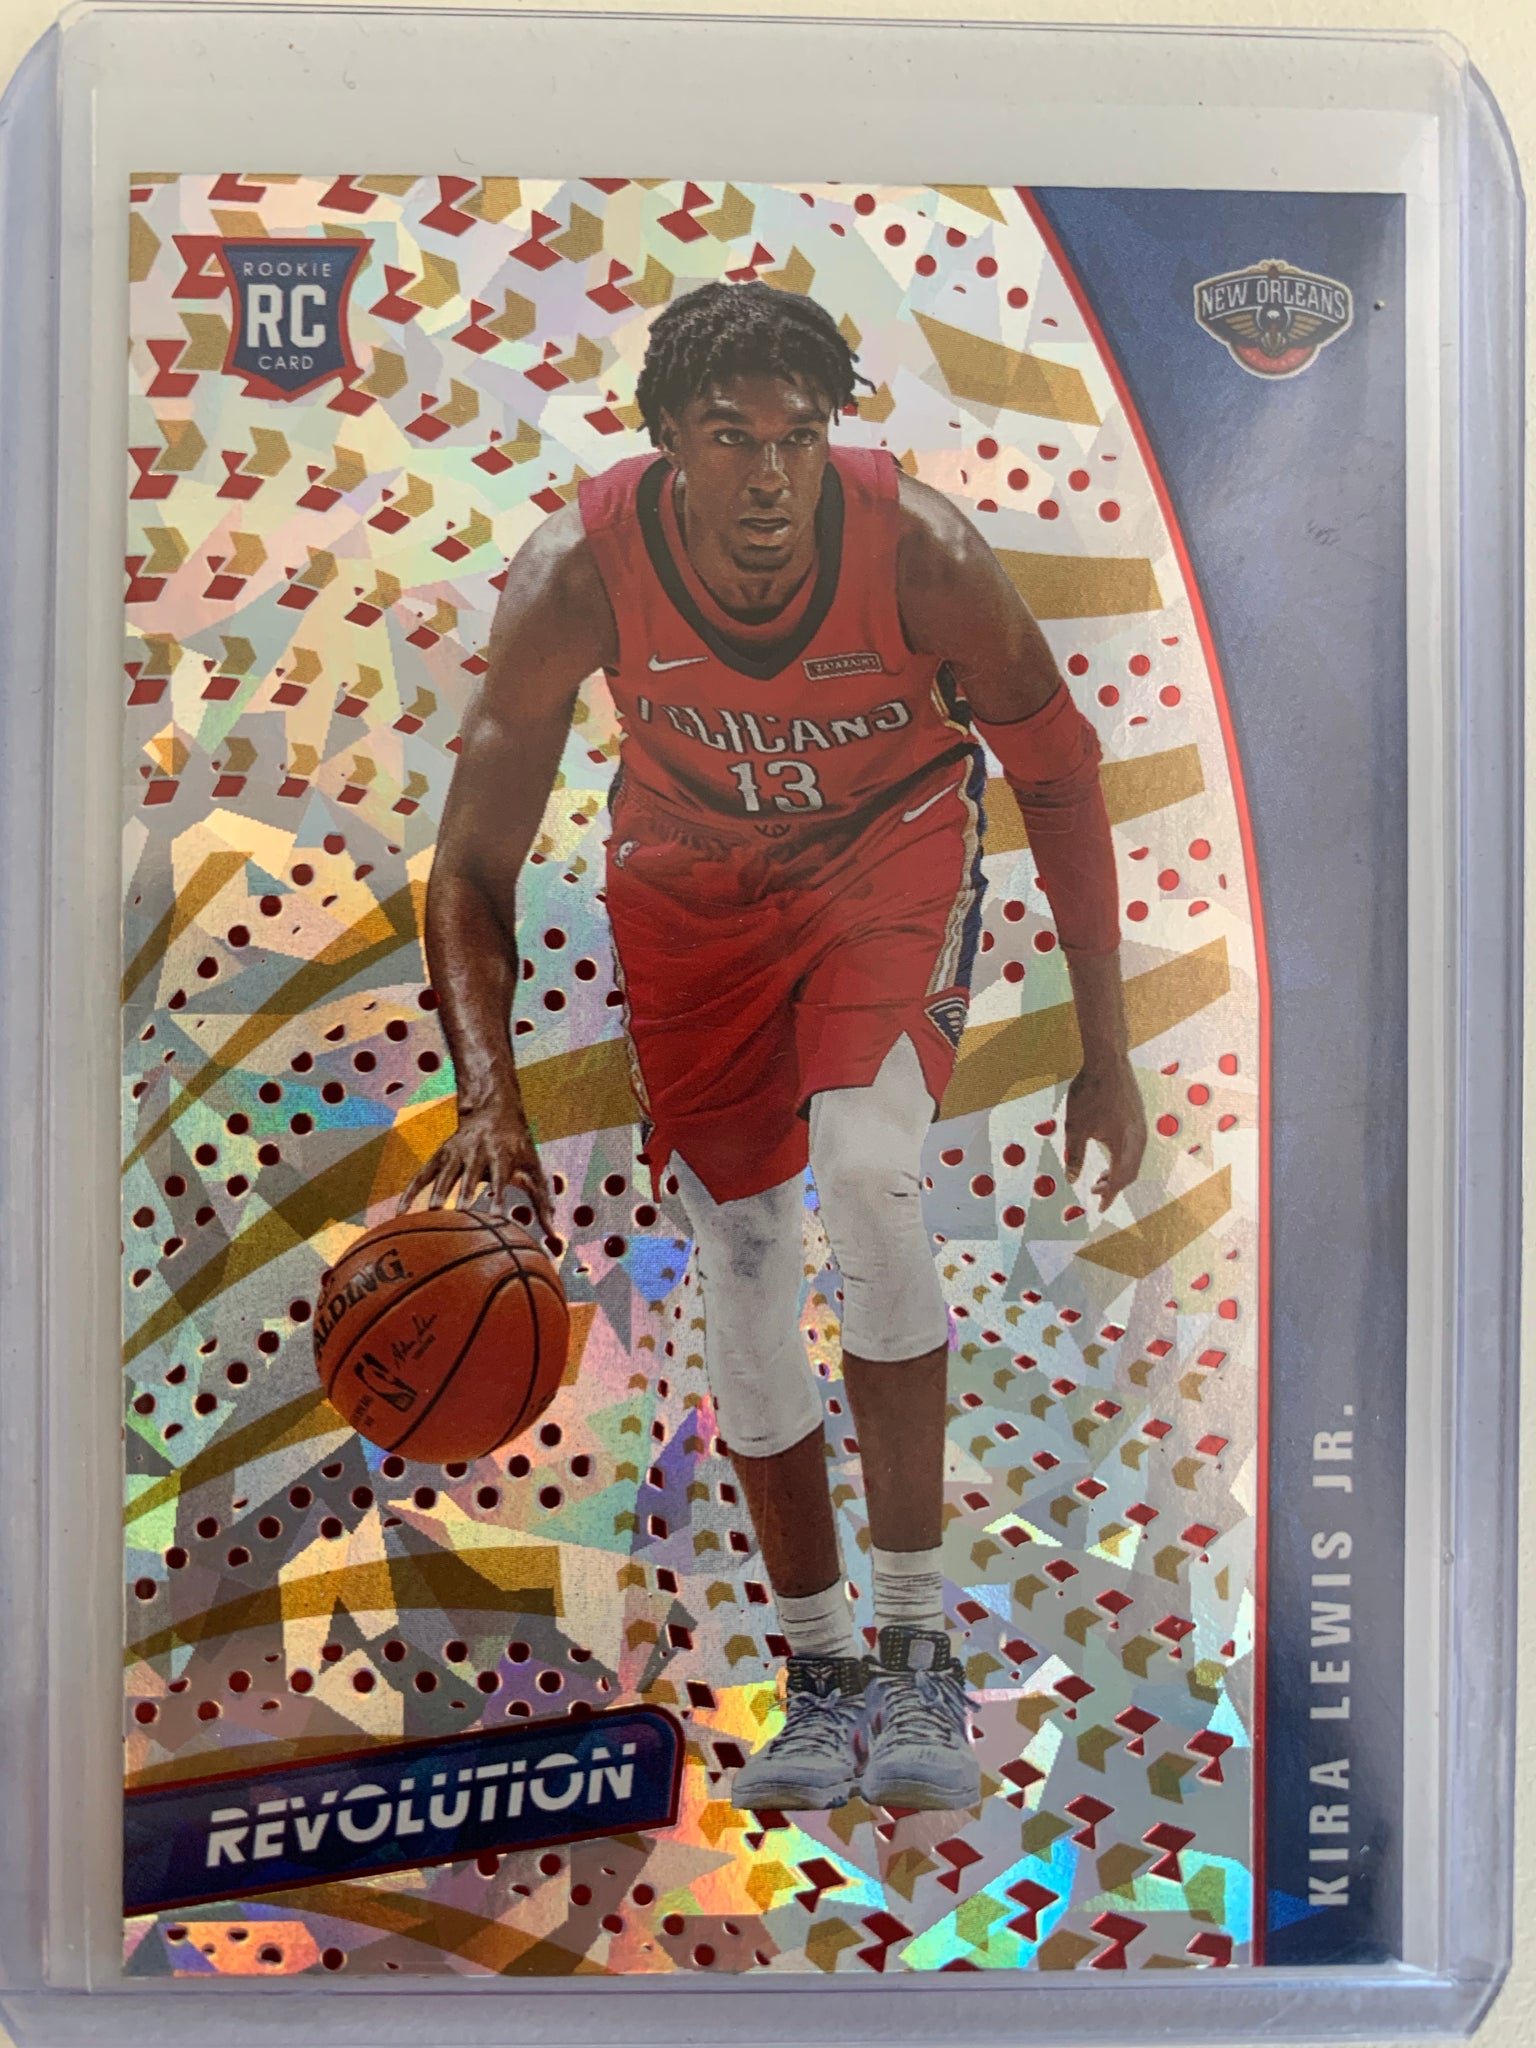 2020-2021 PANINI REVOLUTION NBA BASKETBALL #108 NEW ORLEANS PELICANS - KIRA LEWIS JR CNY CRACKED ICE ROOKIE CARD